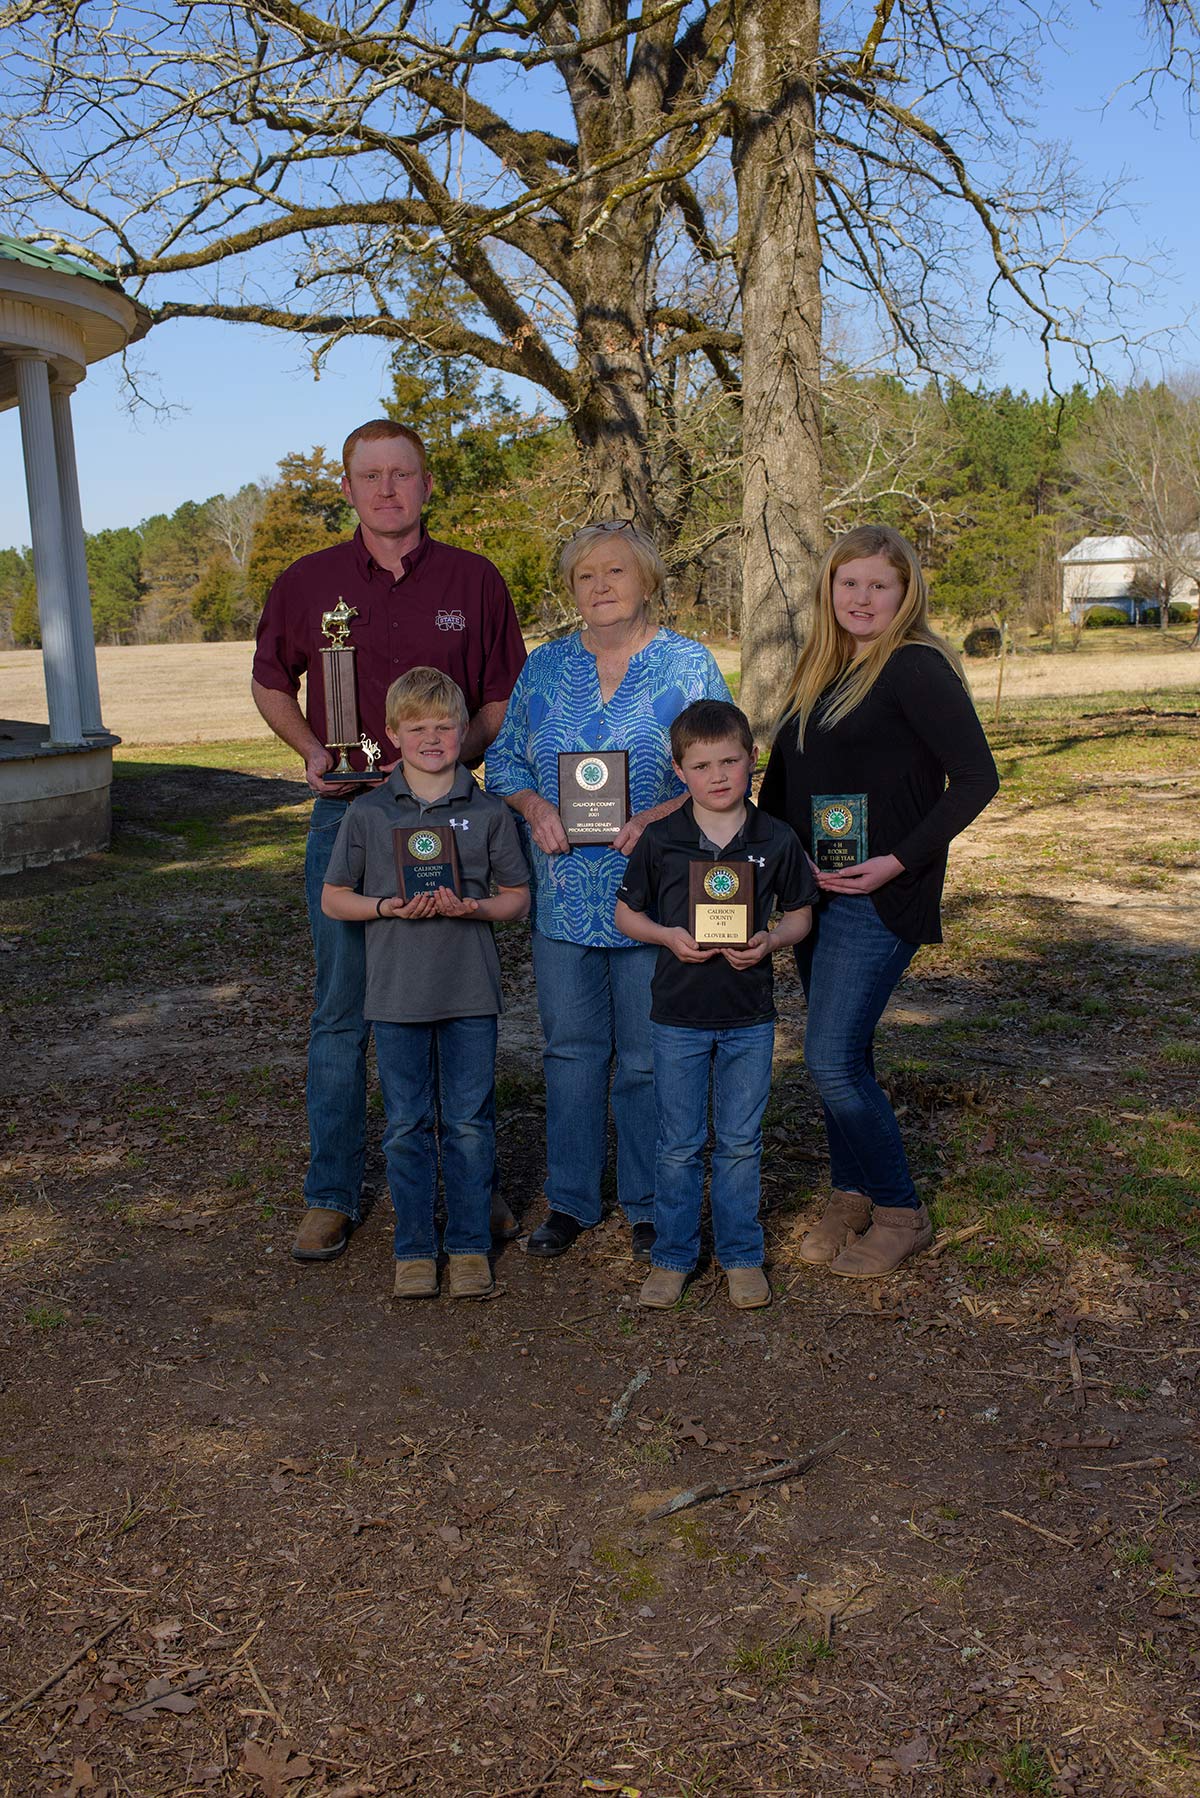 An older woman, man, young girl, and two young boys stand together, each holding a plaque.